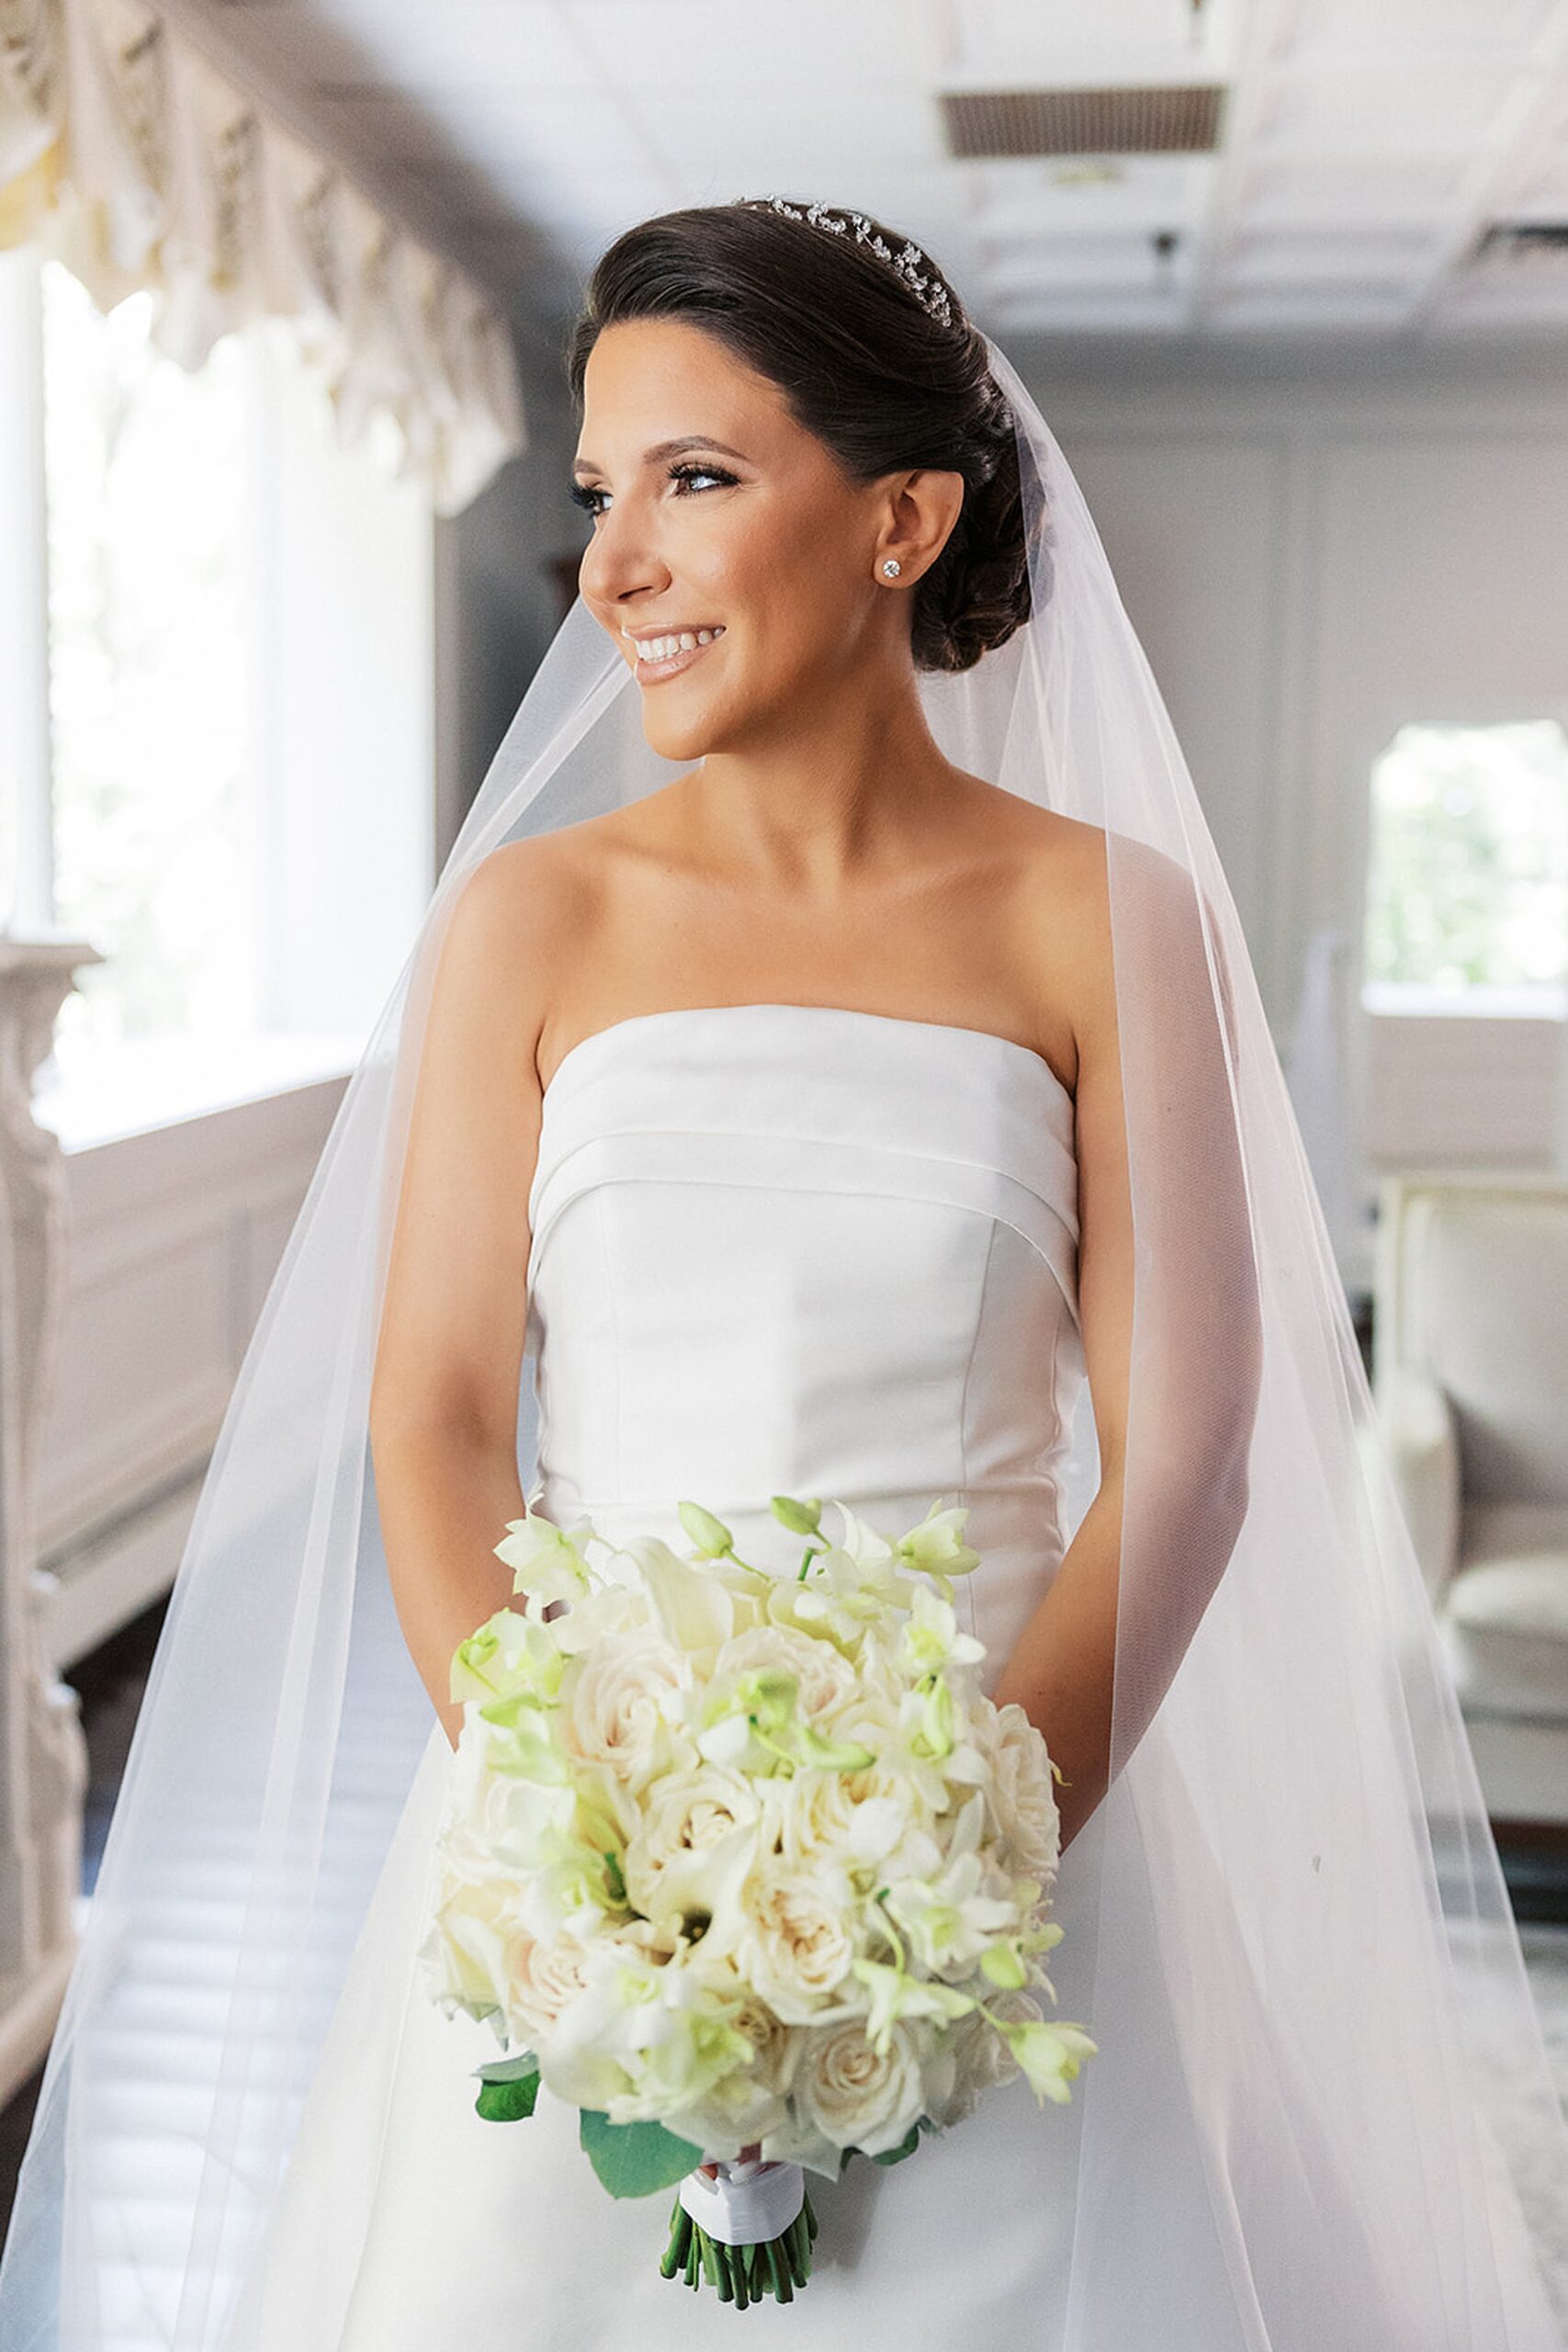 A bride smiles out a window while wearing her silk dress and holding her white rose bouquet at a valley regency wedding